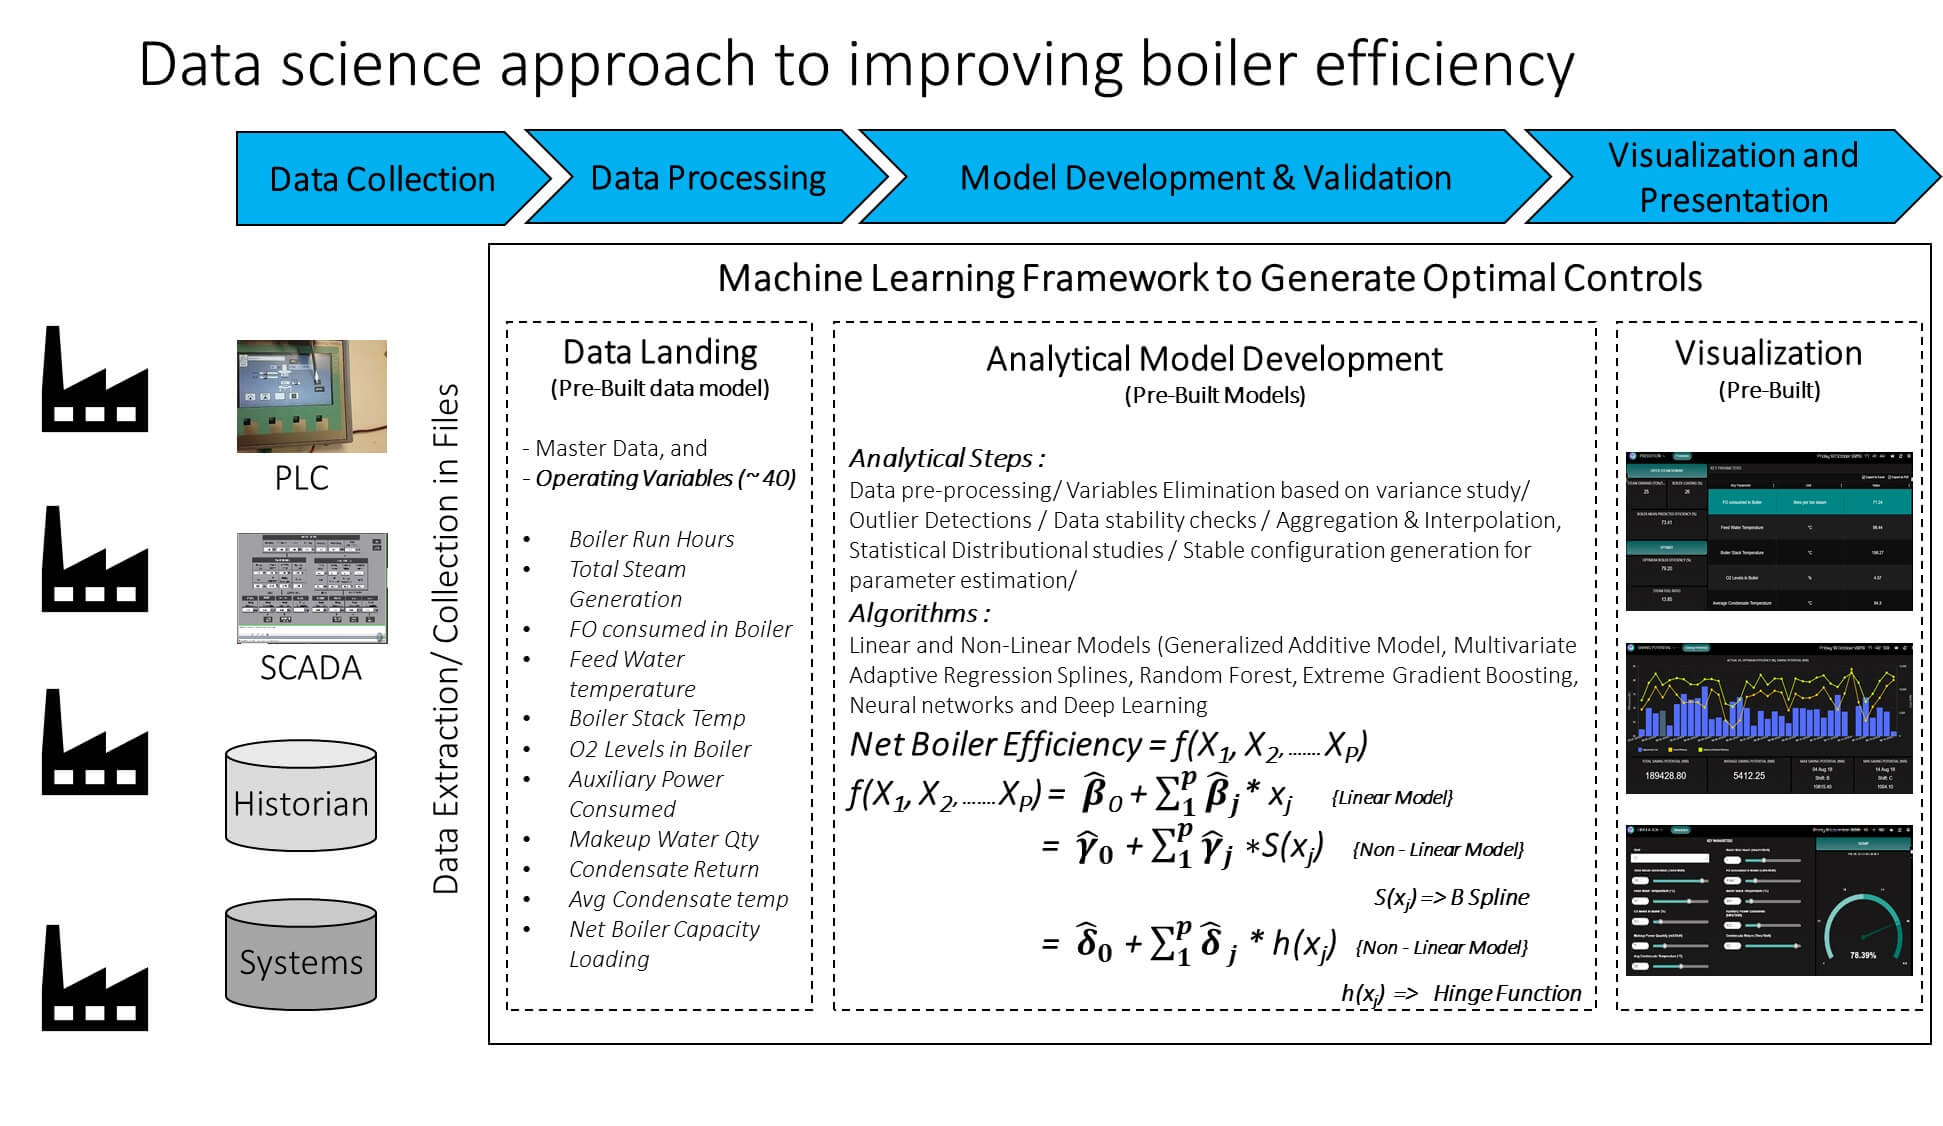 Data science approach to improving boiler efficiency